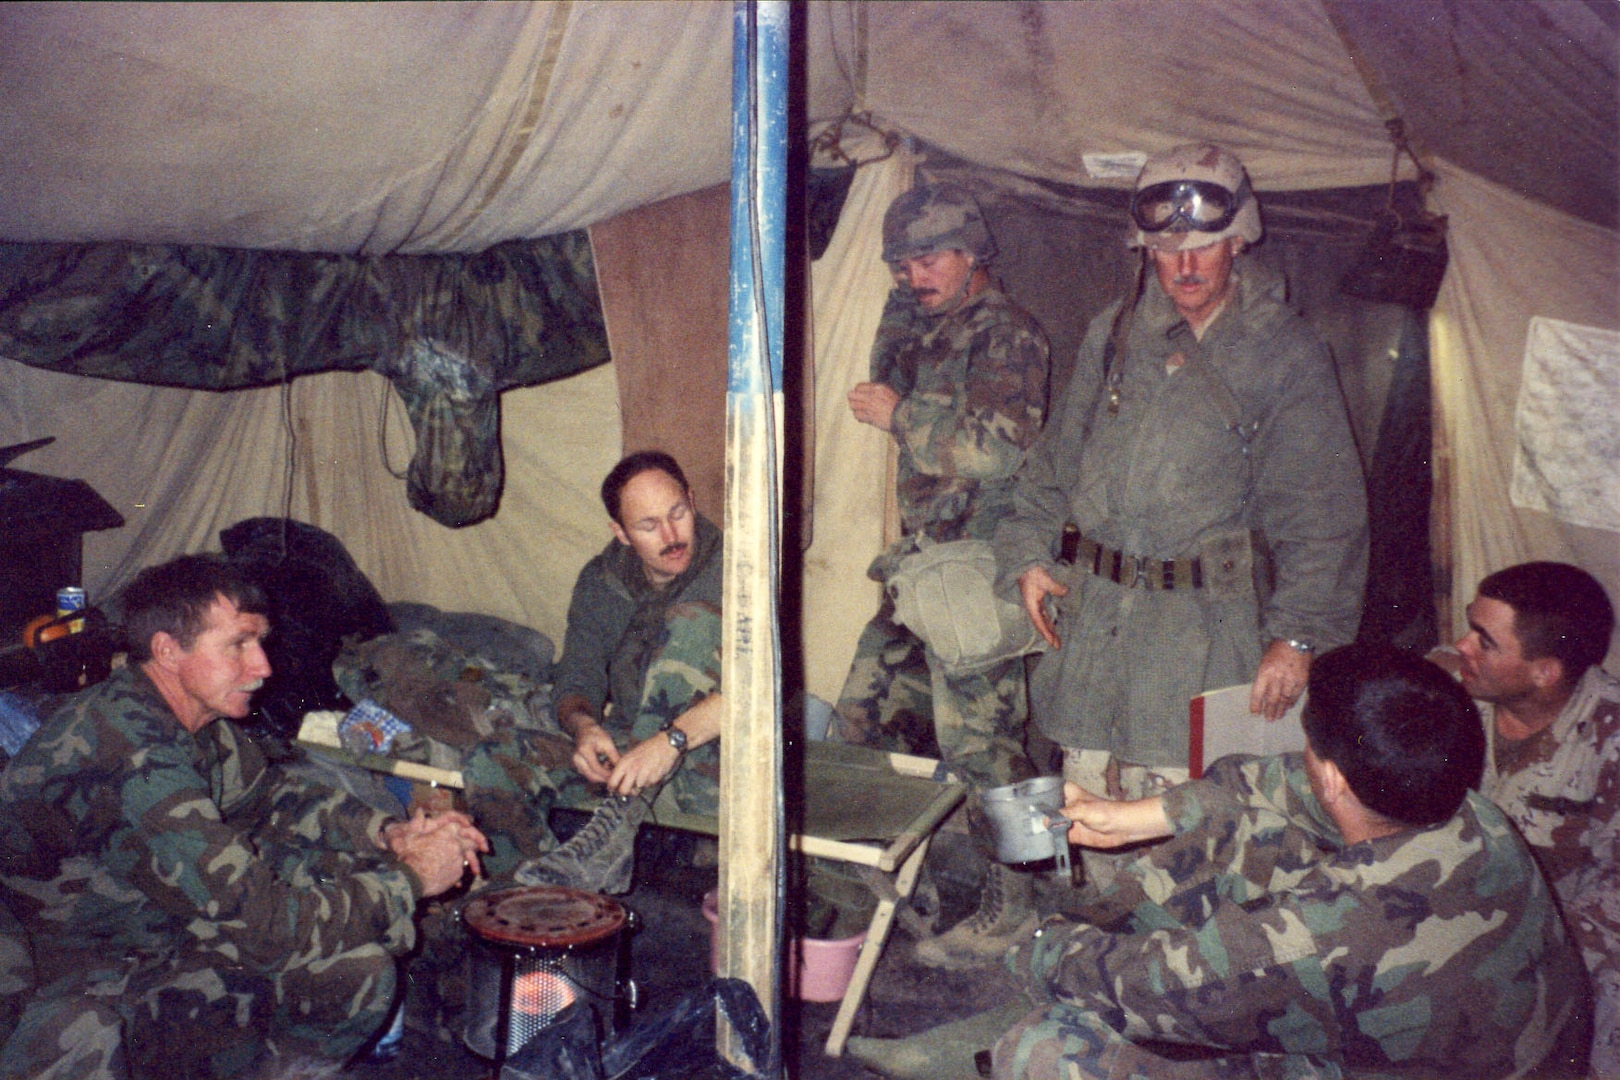 South Carolina Army National Guard Soldiers with the 251st Rear Area Operations Center at Log-base "Charlie" near the Saudi/Iraq border deployed to Southwest Asia starting on Jan. 9, 1991, to provide support during Operation Desert Storm. The South Carolina National Guard deployed more than 2,400 Army and Air Guard service members during Operations Desert Shield and Desert Storm, representing 11 different Army Guard units and eight Air Guard units. 